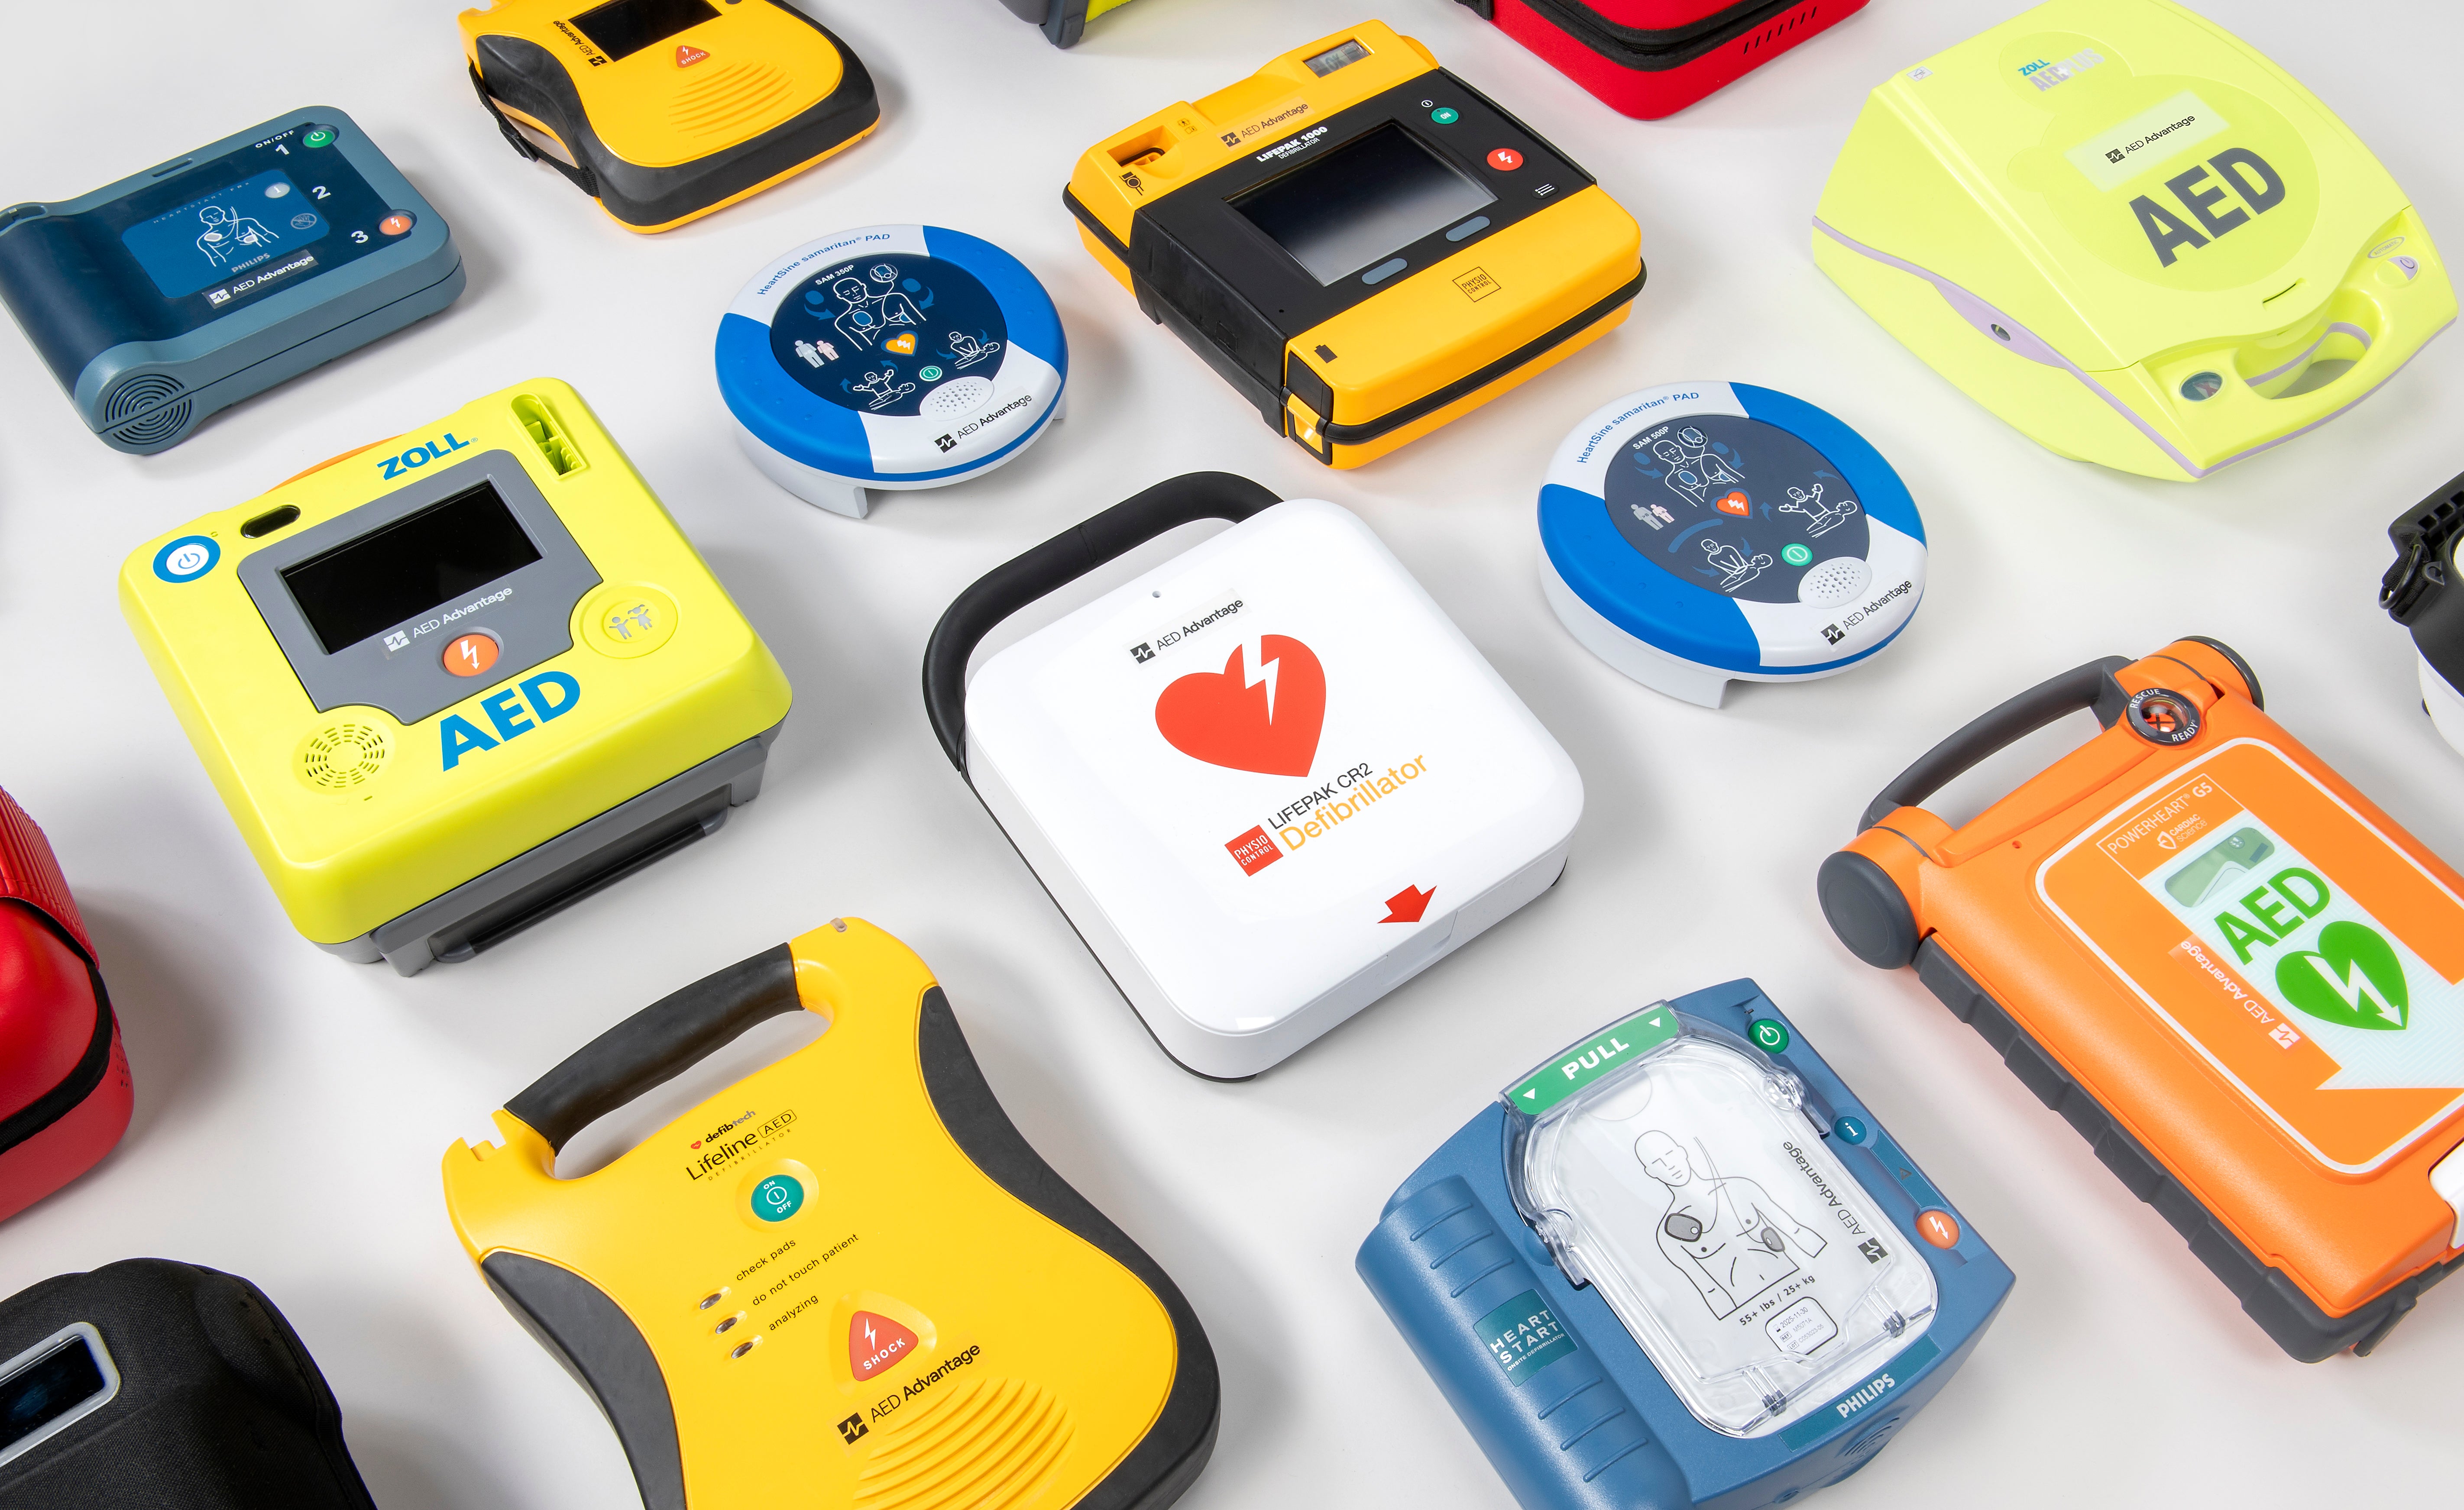 What Are The 7 Steps Of Using An AED?